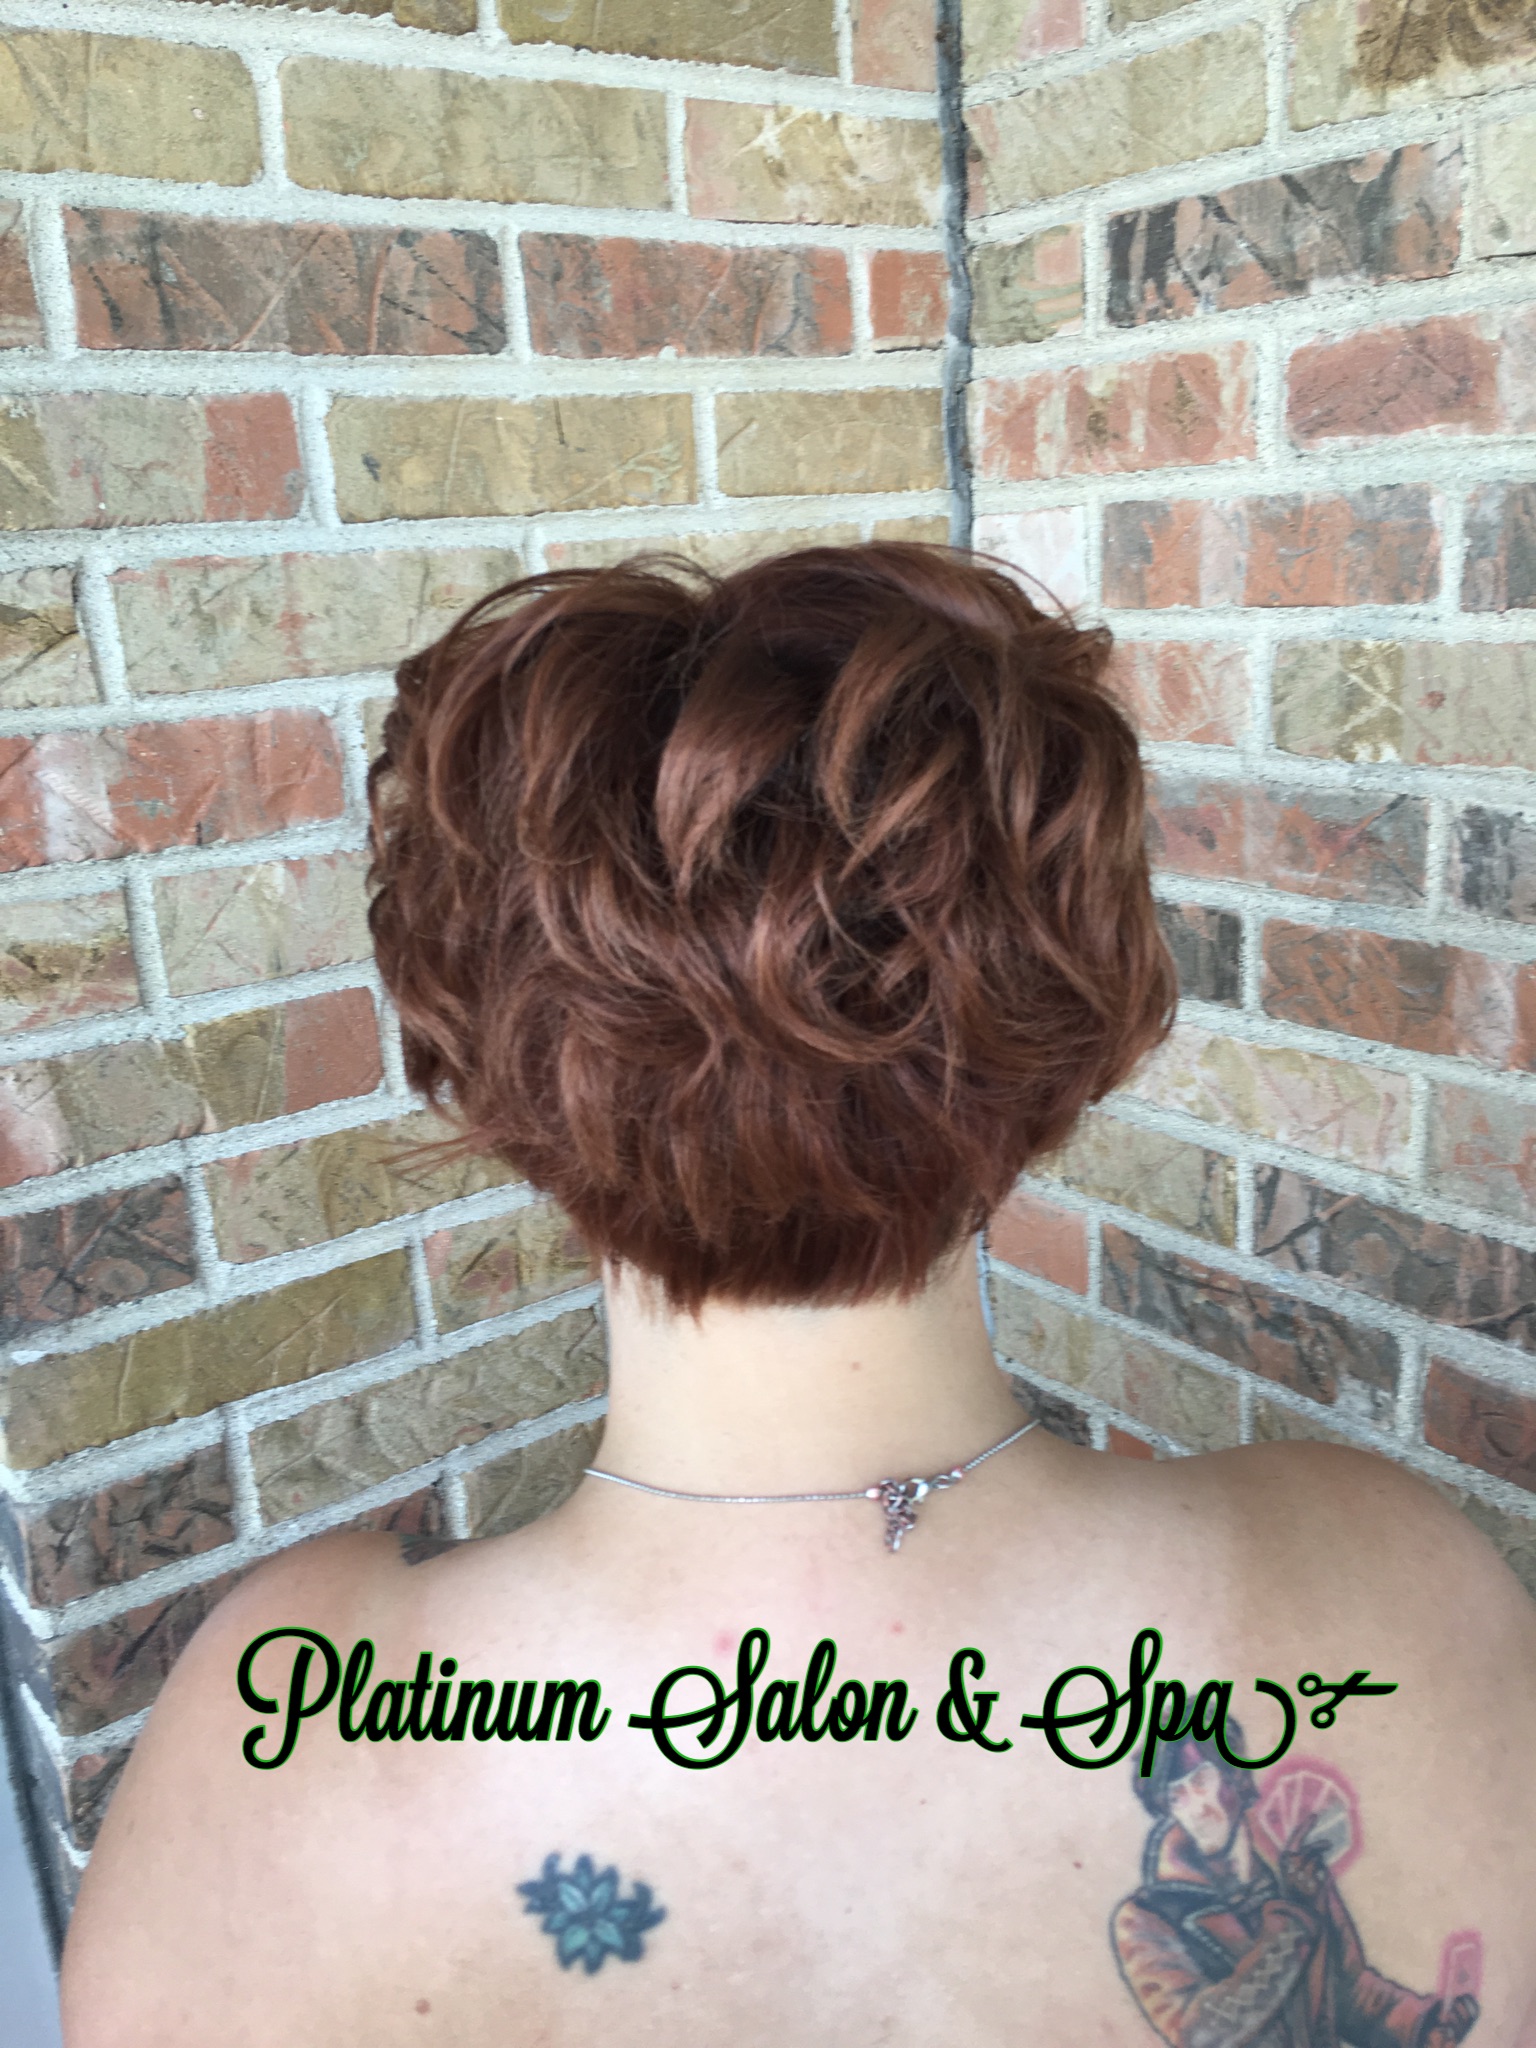 Short Brown Curly Hair Style